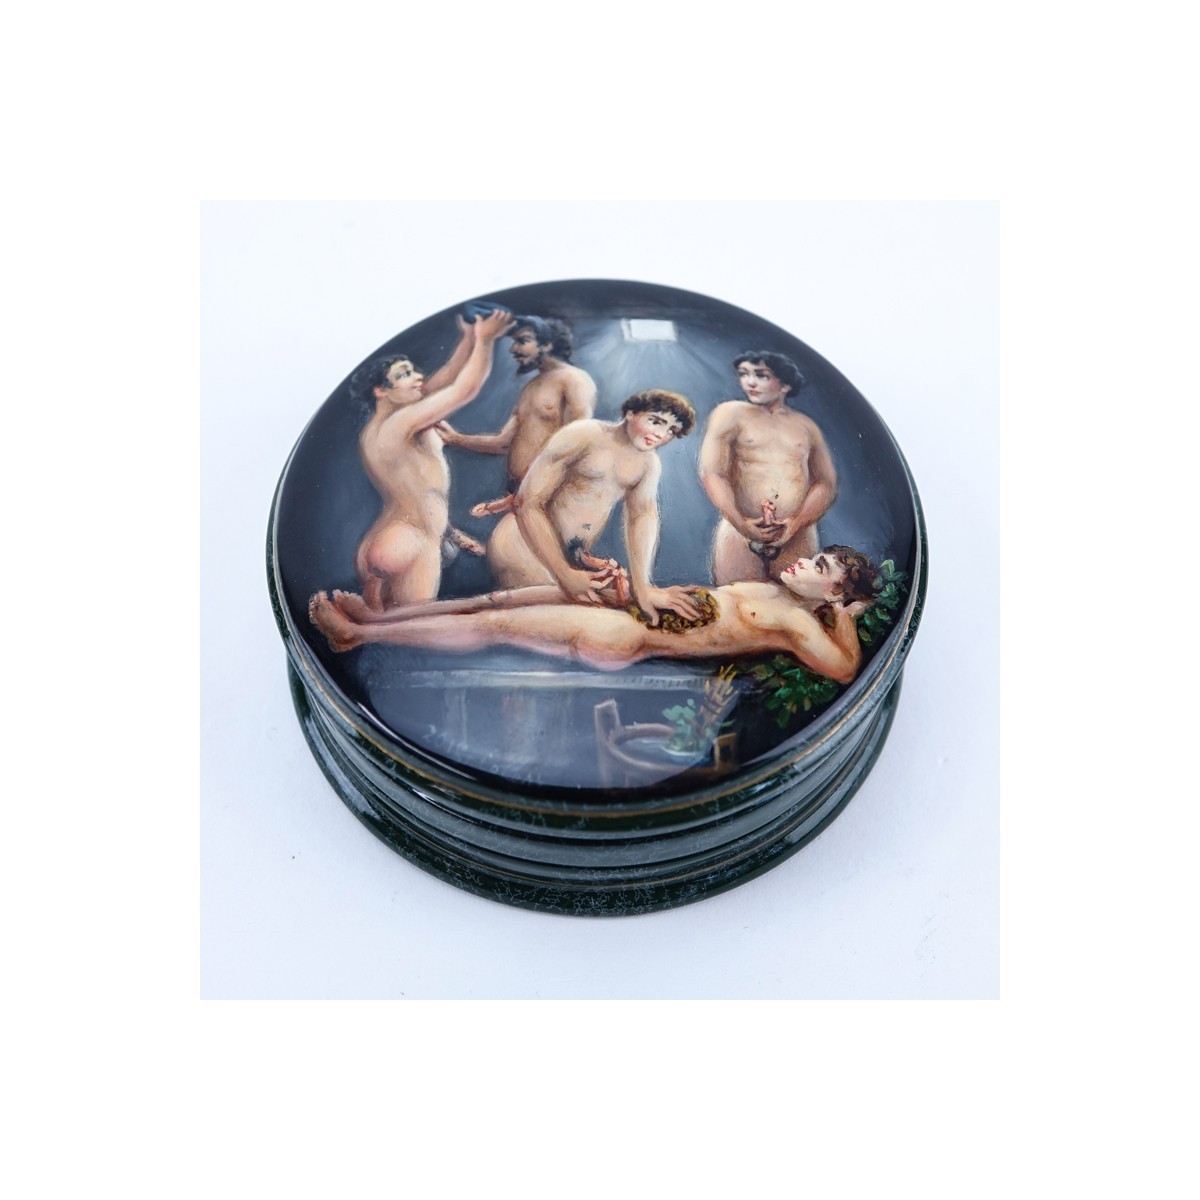 Russian Three (3) Part Lacquered Box with Painted Heteroerotic Scene to Top and Homoerotic Scene On Inside Top. Artist signed.